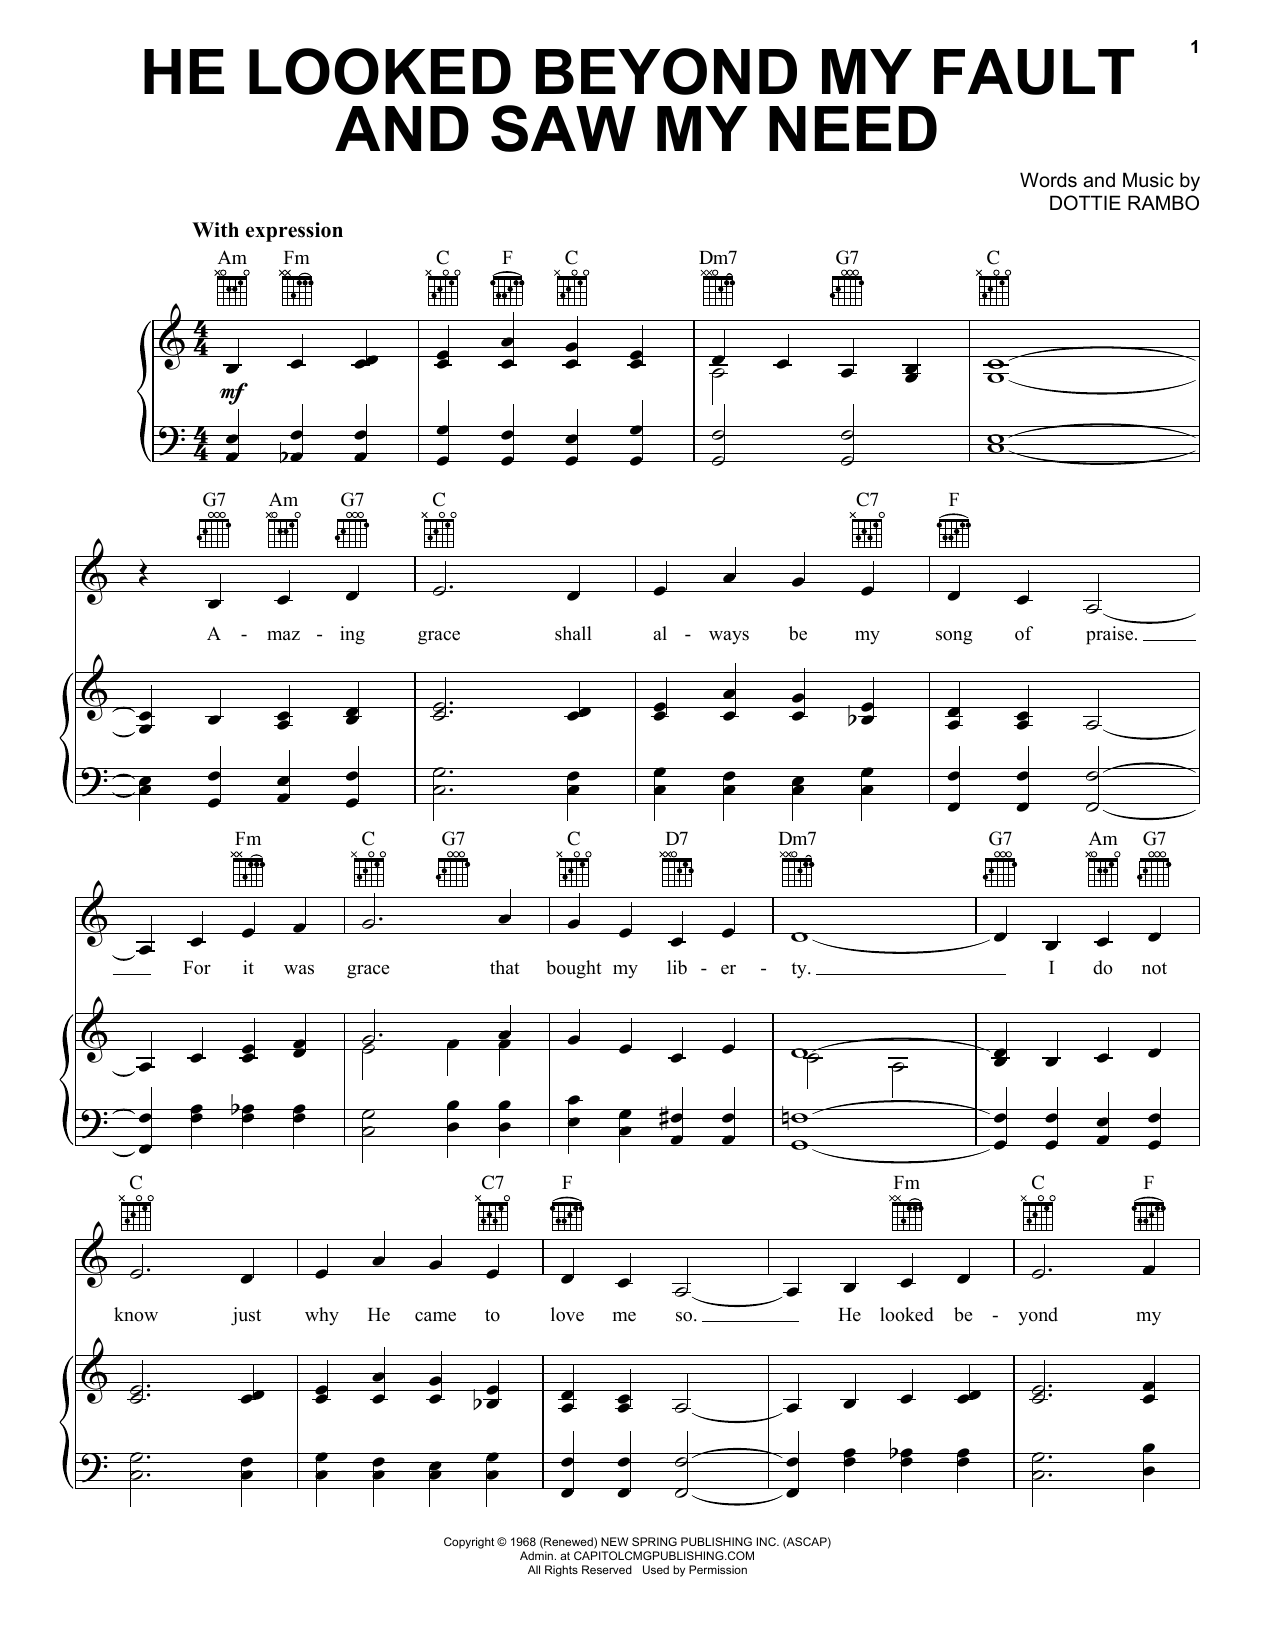 Download Dottie Rambo He Looked Beyond My Fault And Saw My Ne Sheet Music